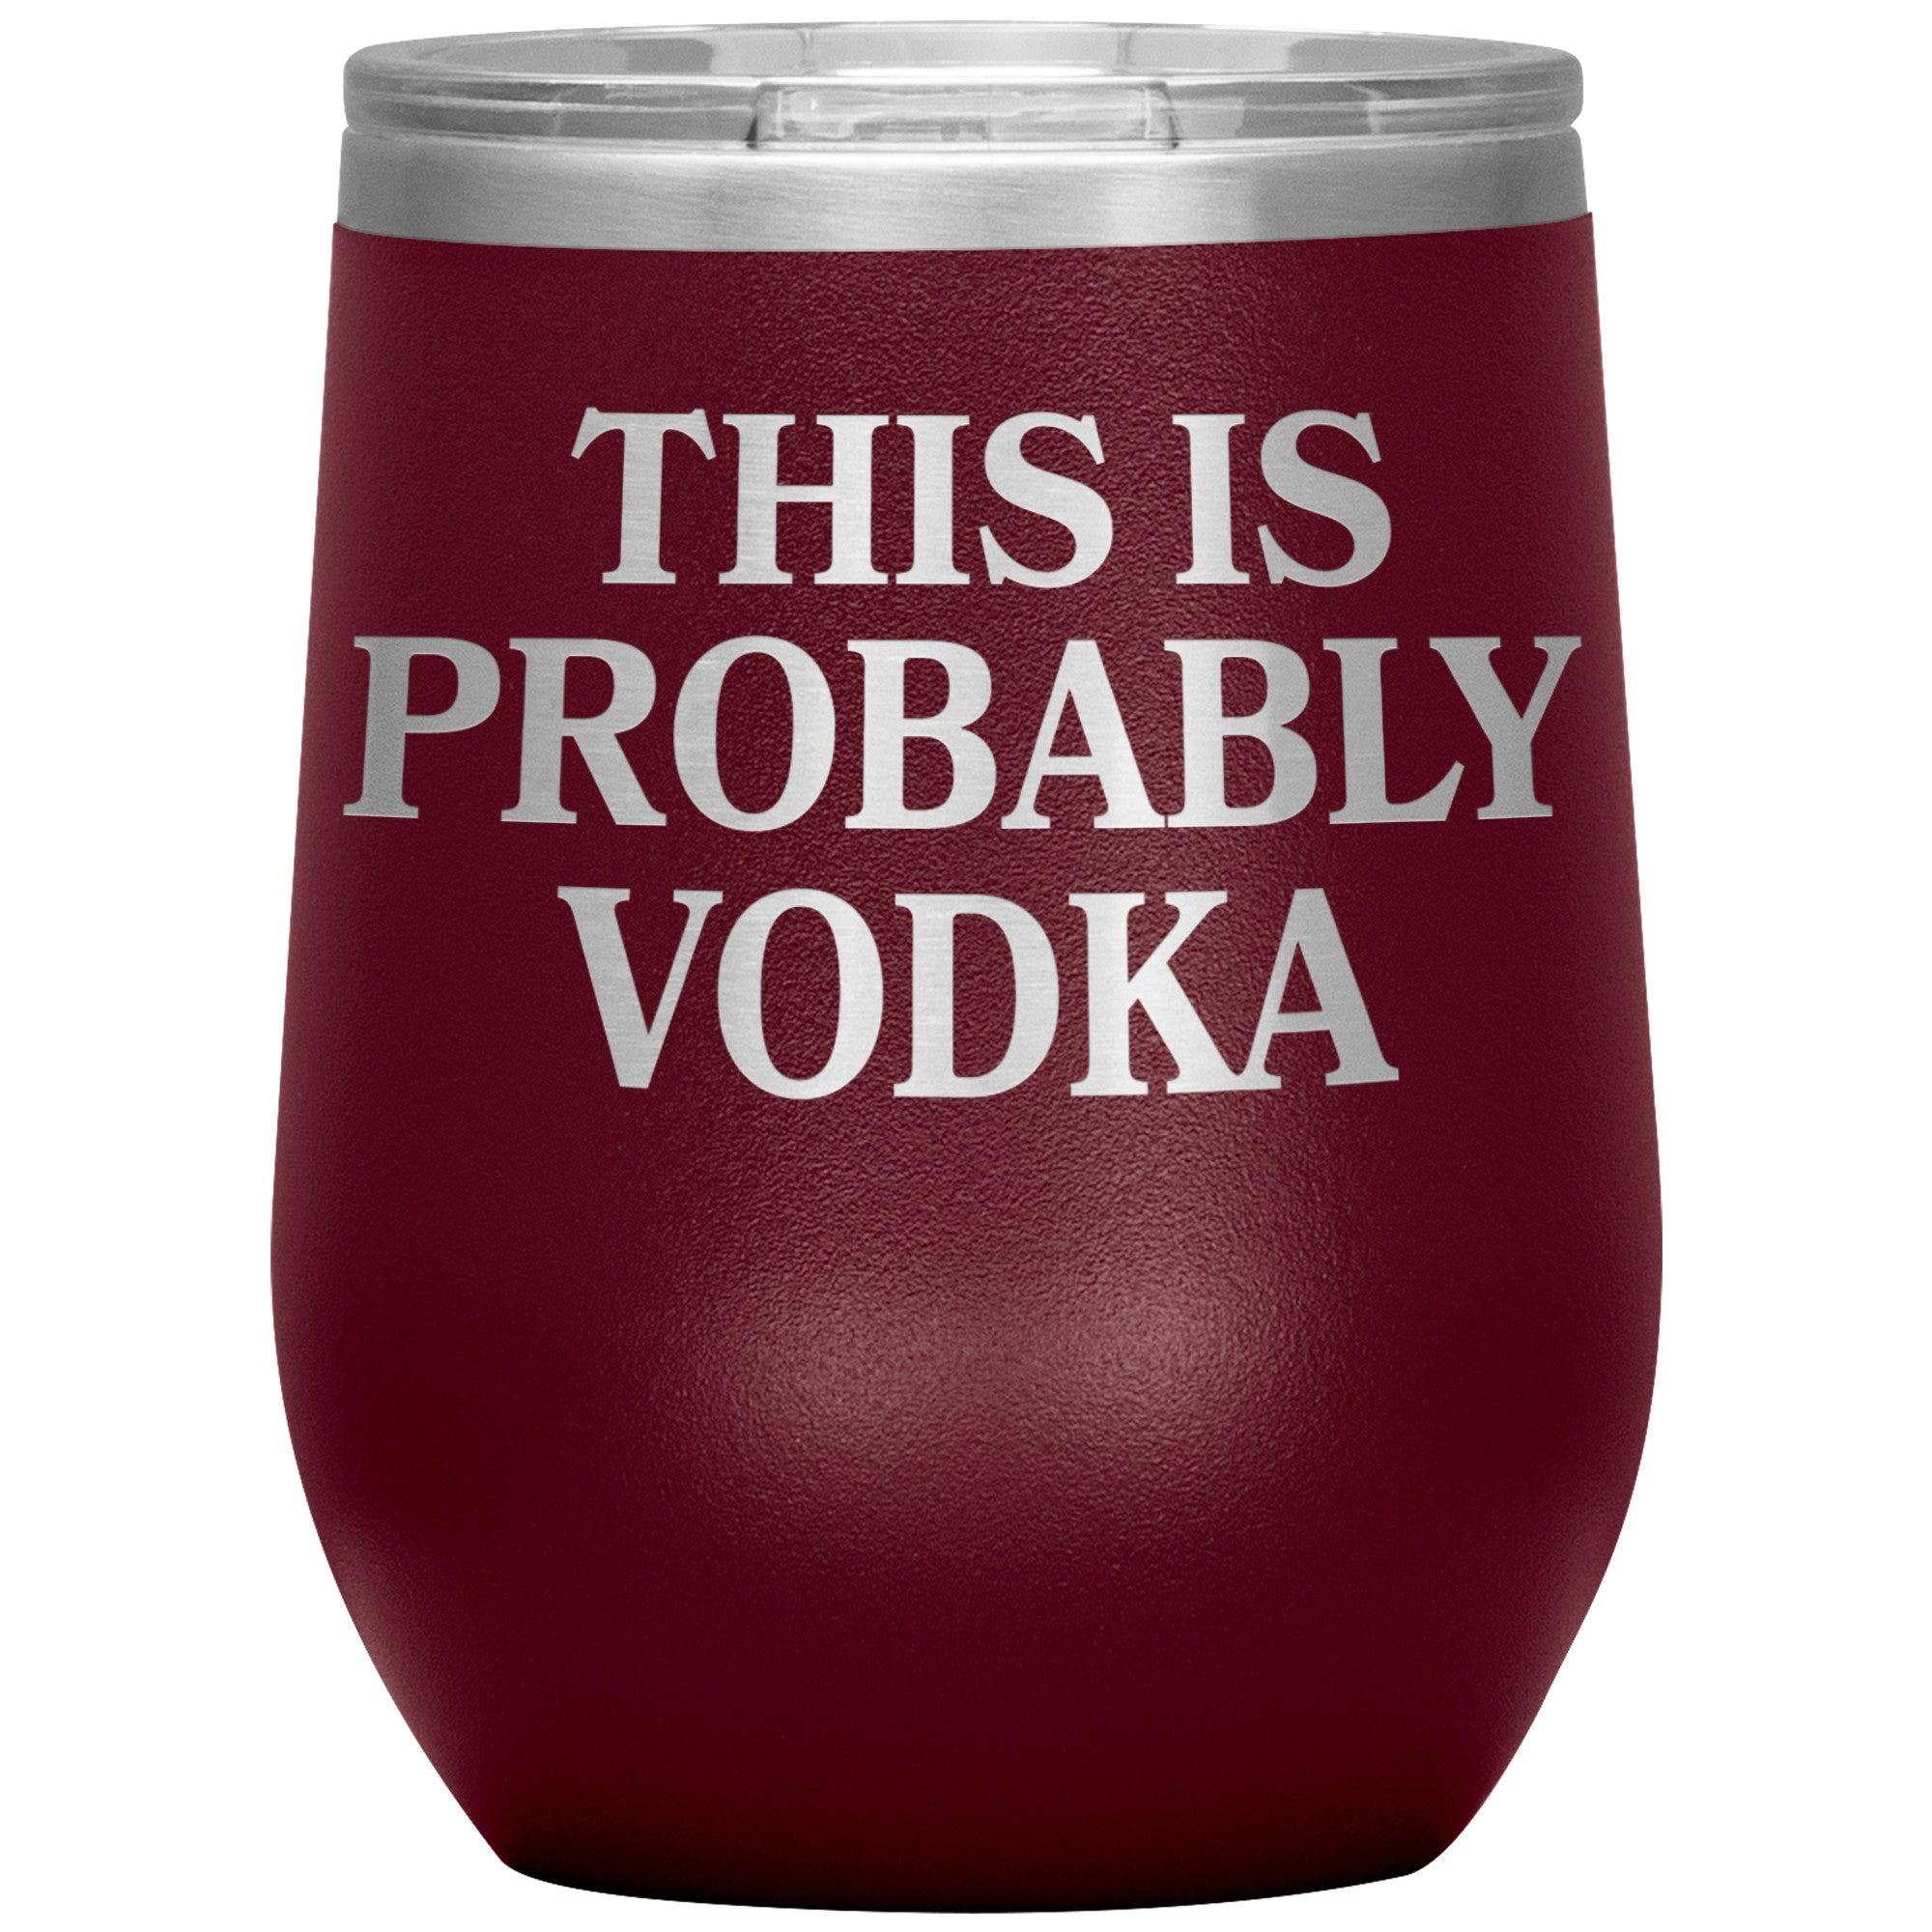 This Is Probably Vodka Insulated Wine Tumbler Tumblers teelaunch Maroon  